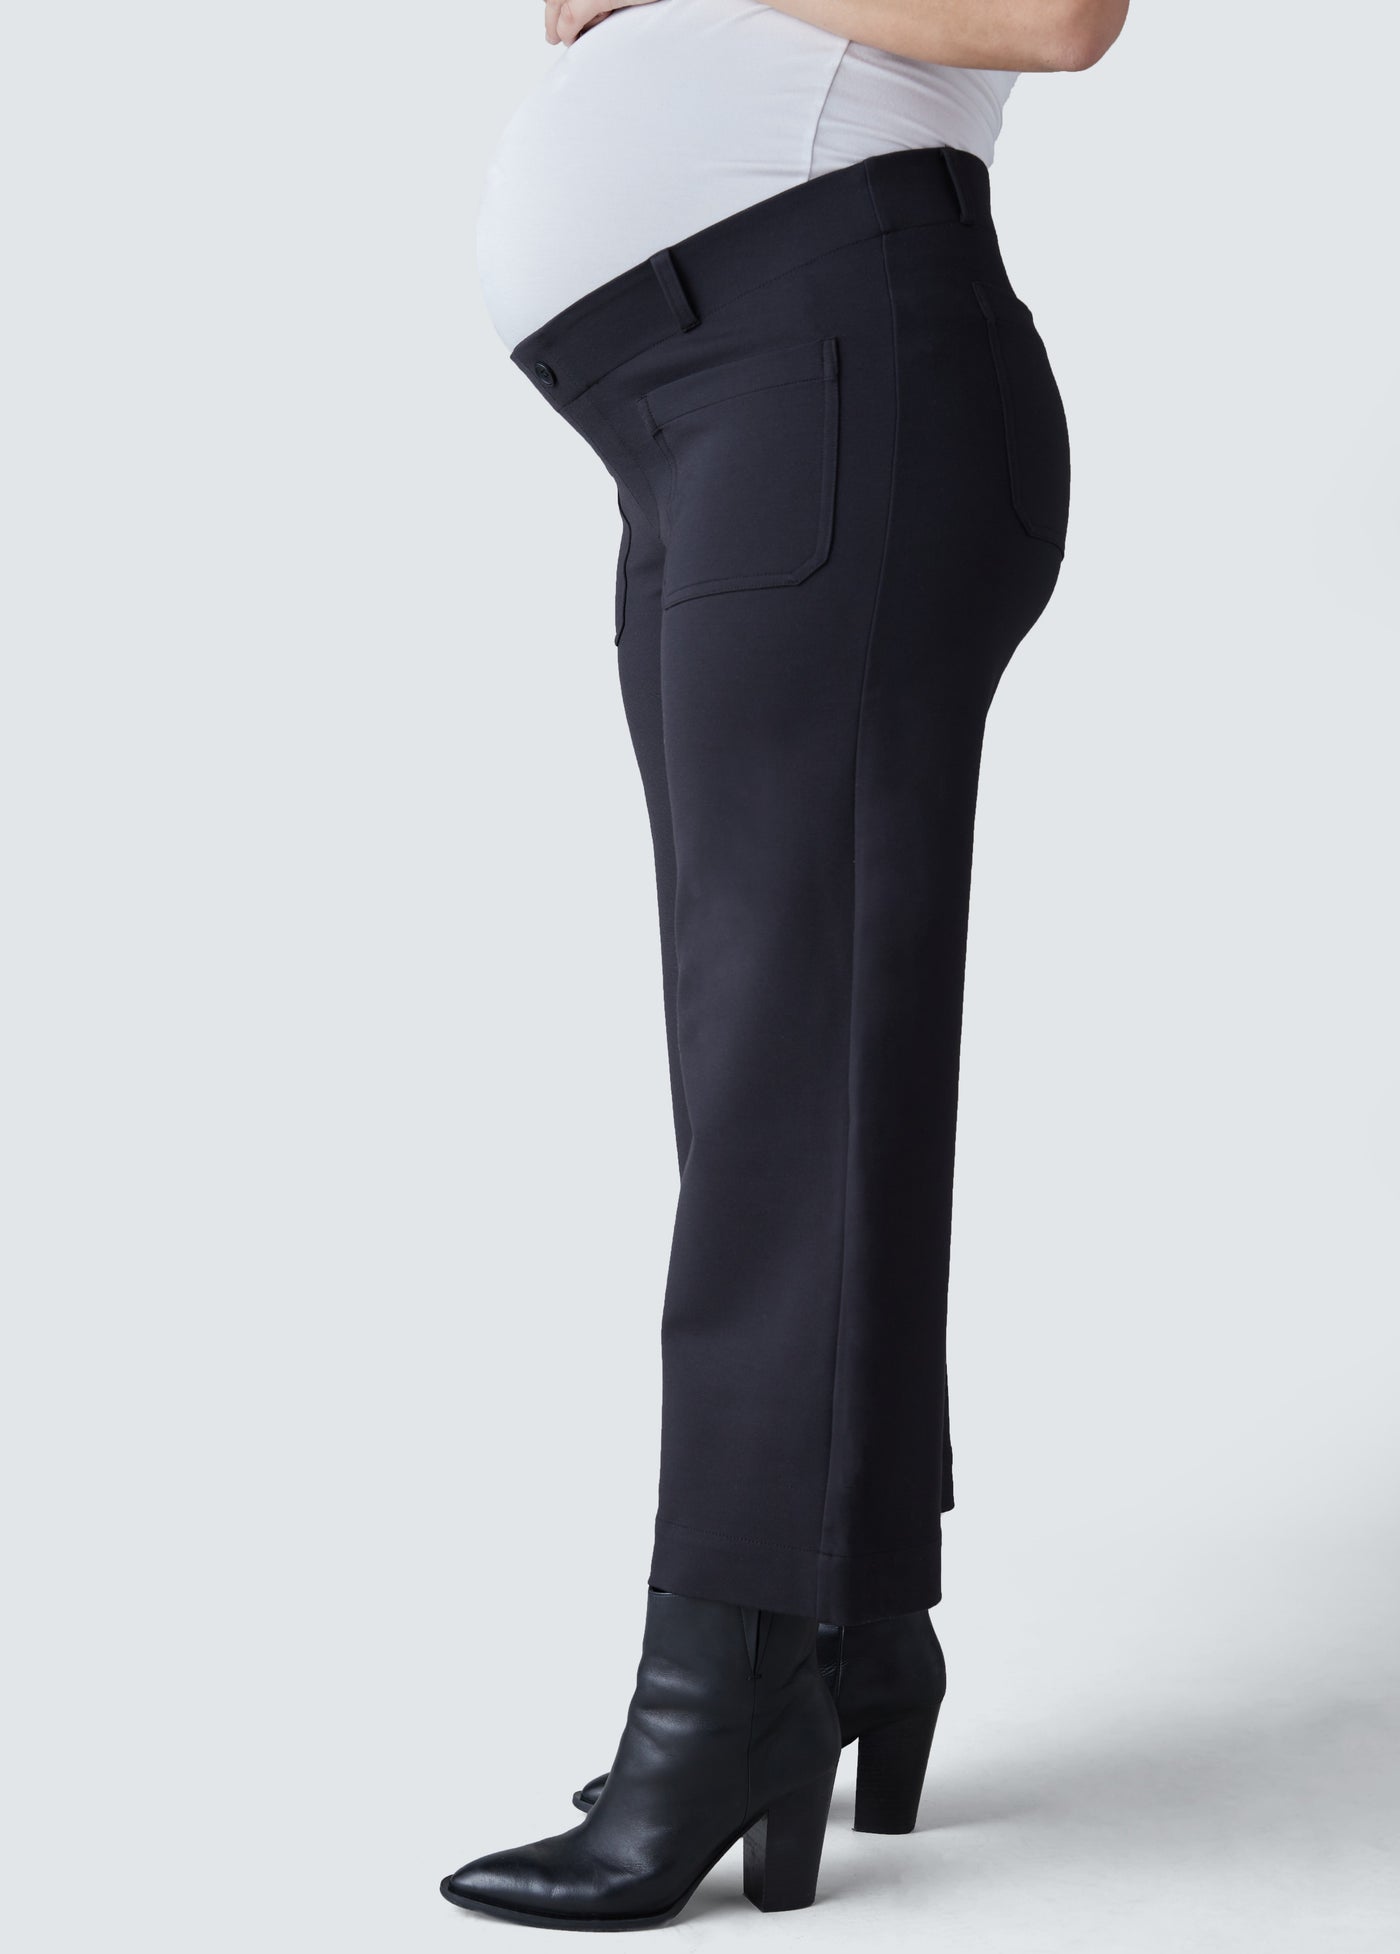 Black Maternity Pants with Pockets